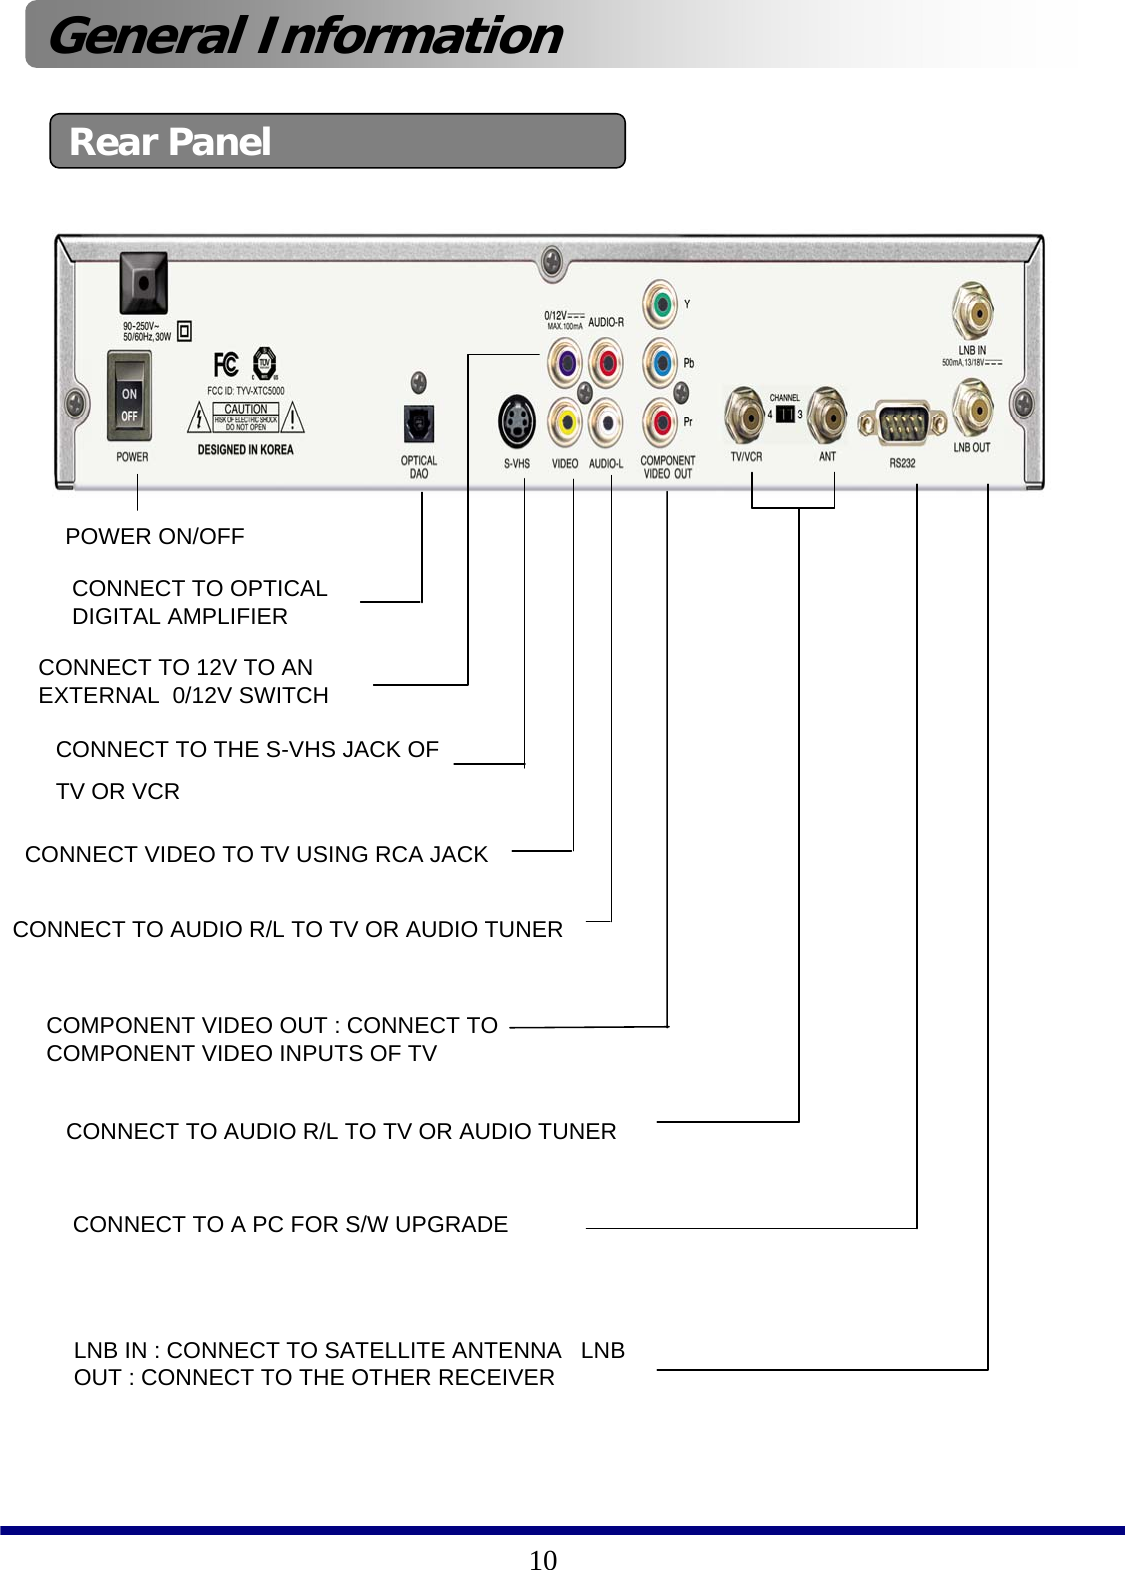 10General Information Rear PanelCONNECT TO AUDIO R/L TO TV OR AUDIO TUNERCONNECT TO 12V TO AN EXTERNAL  0/12V SWITCHCONNECT VIDEO TO TV USING RCA JACKCONNECT TO AUDIO R/L TO TV OR AUDIO TUNERCONNECT TO A PC FOR S/W UPGRADELNB IN : CONNECT TO SATELLITE ANTENNA   LNB OUT : CONNECT TO THE OTHER RECEIVERPOWER ON/OFFCONNECT TO OPTICAL DIGITAL AMPLIFIERCONNECT TO THE S-VHS JACK OF TV OR VCRCOMPONENT VIDEO OUT : CONNECT TO COMPONENT VIDEO INPUTS OF TV